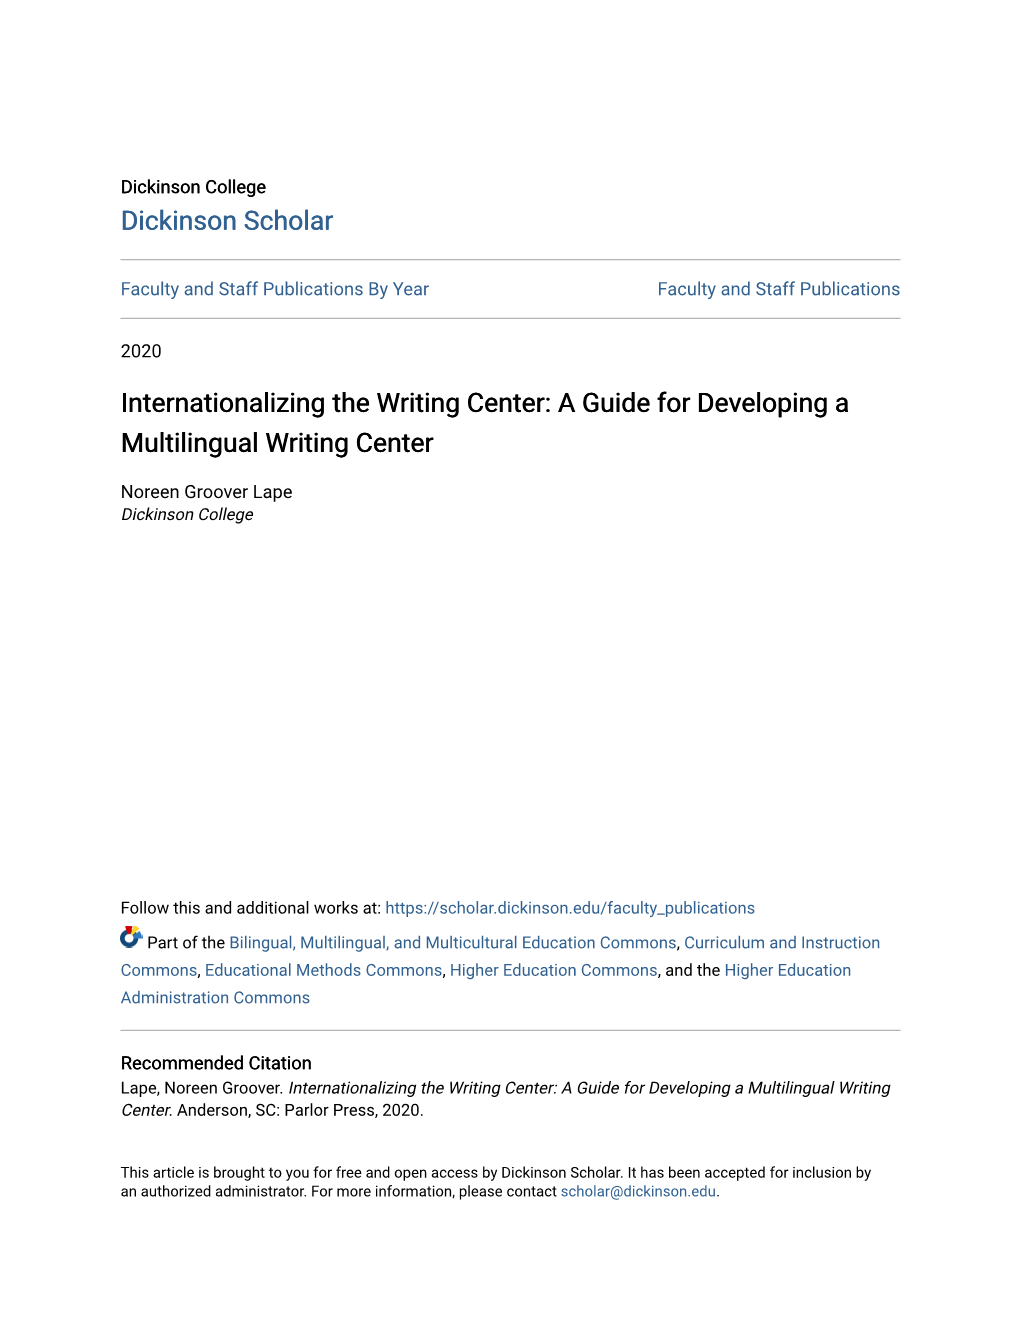 Internationalizing the Writing Center: a Guide for Developing a Multilingual Writing Center